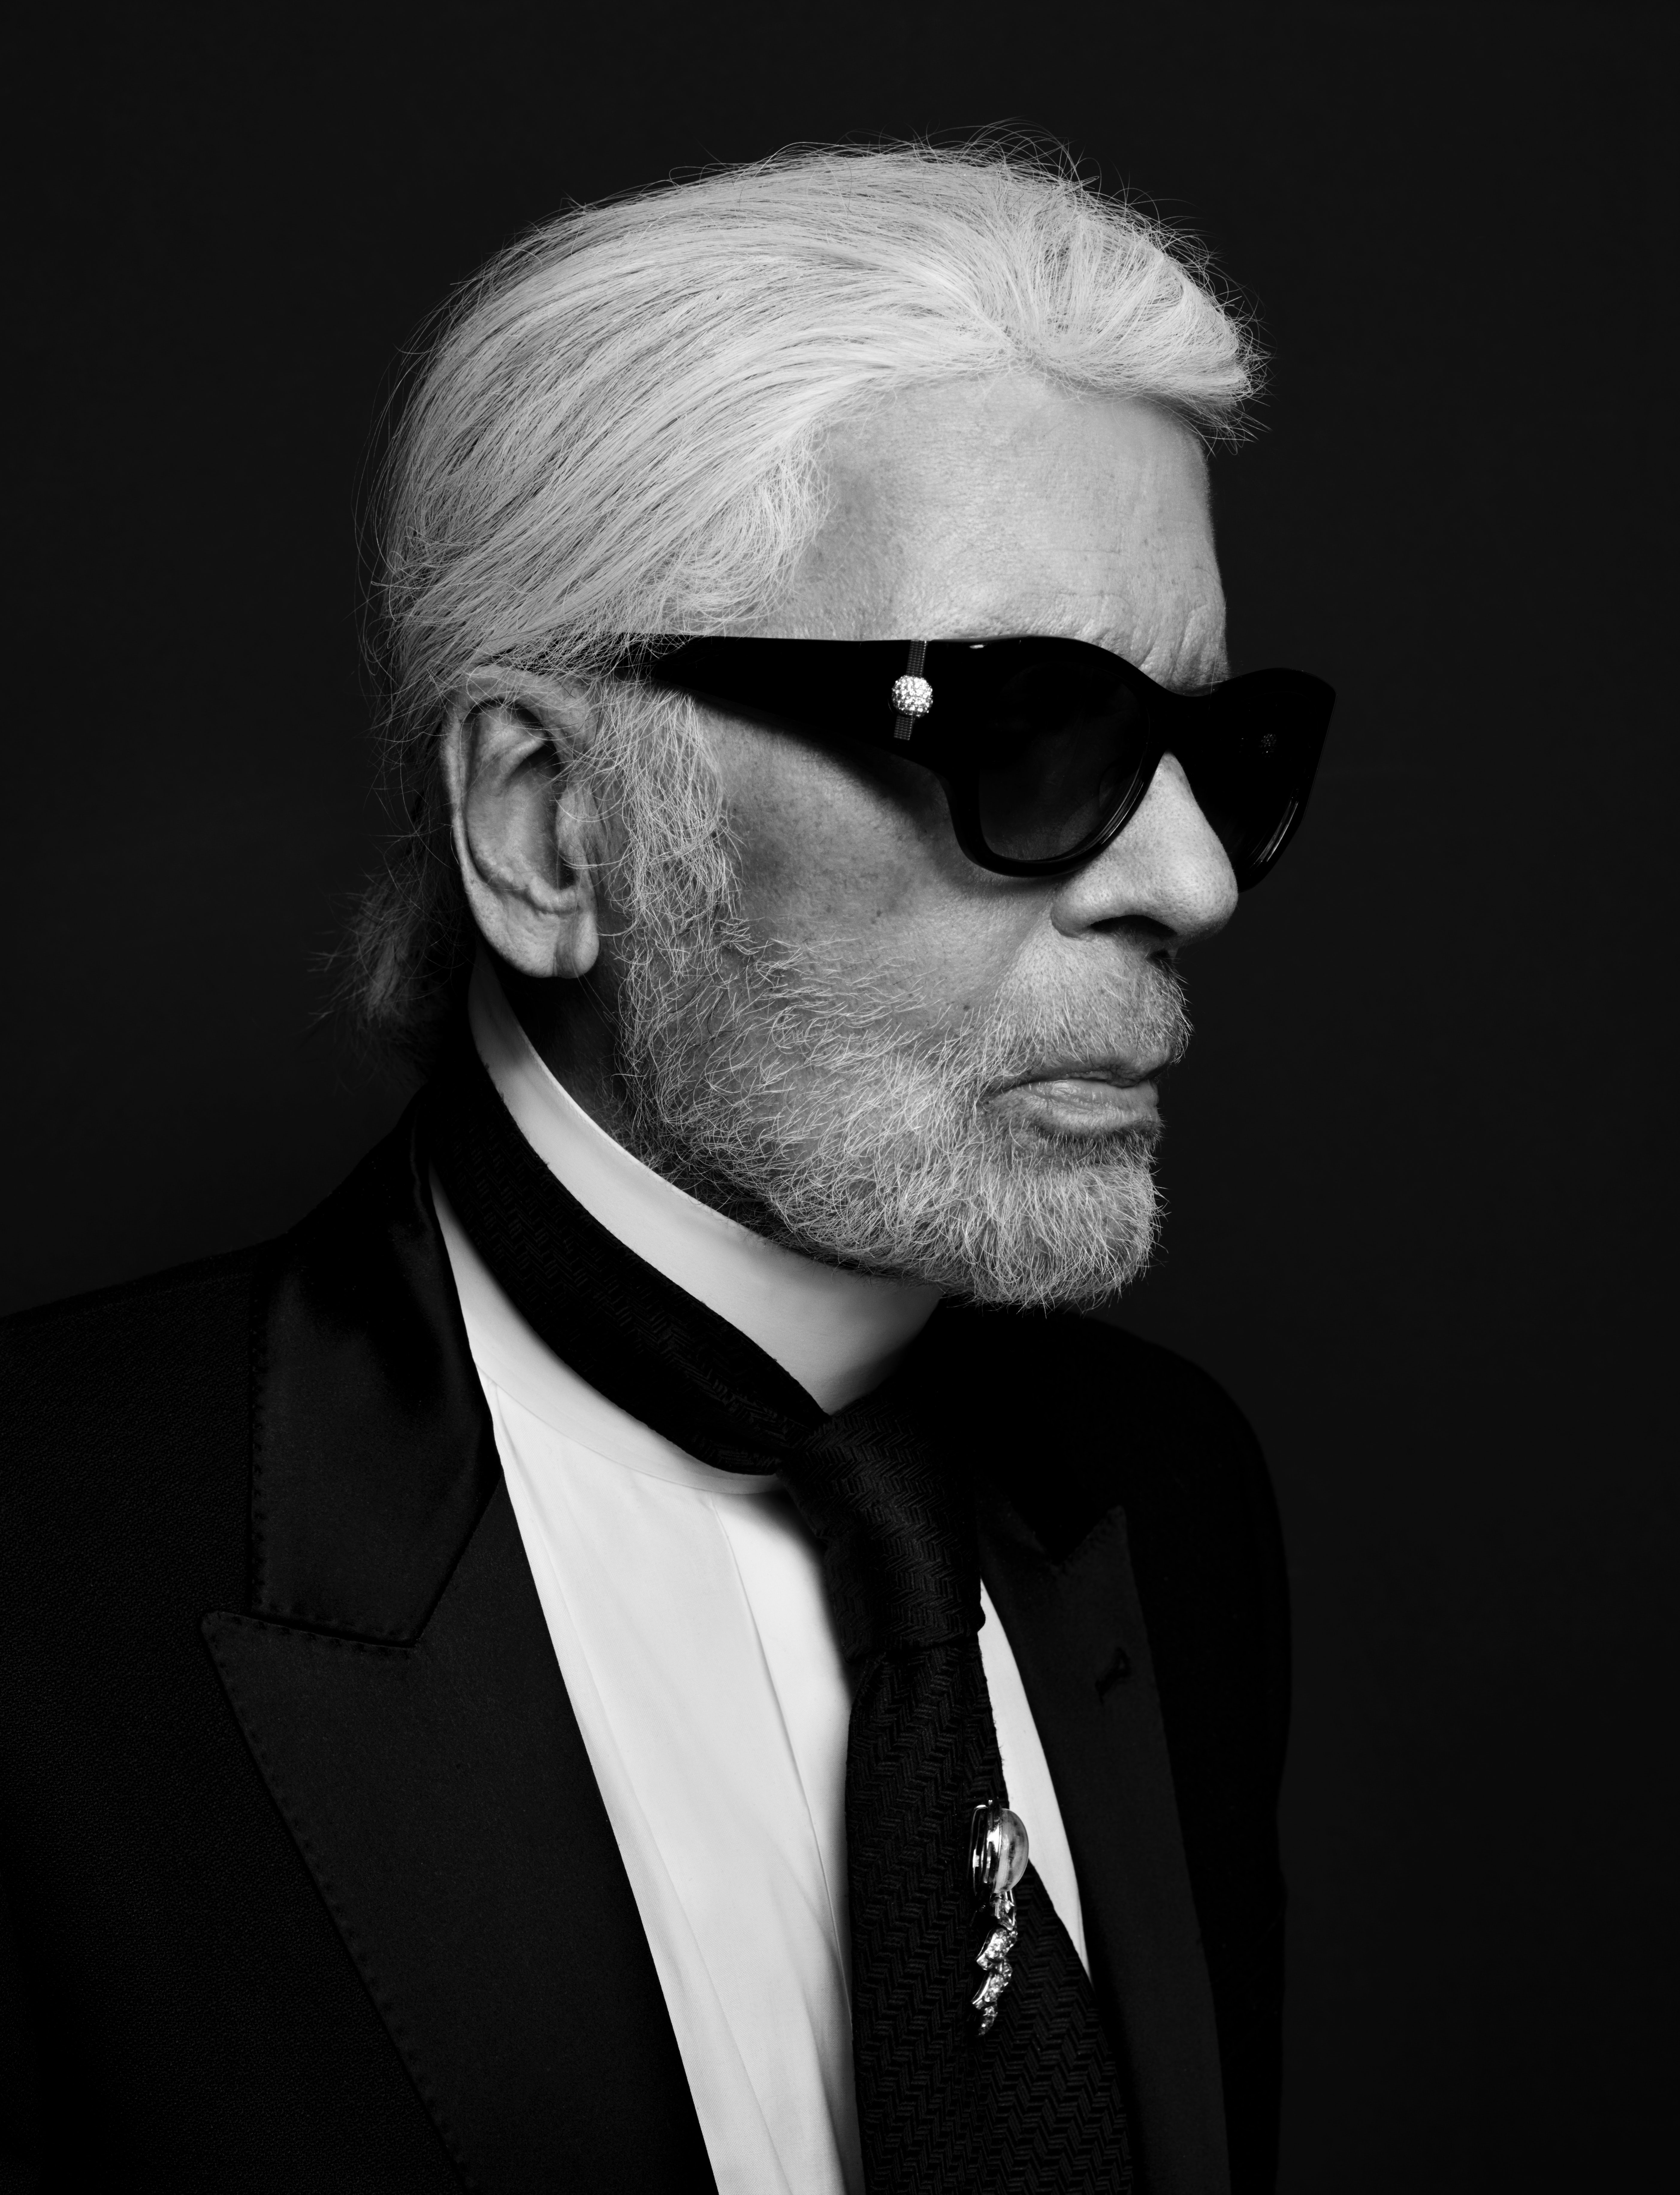 Fashion icon Karl Lagerfeld dies at 85 - The Globe and Mail